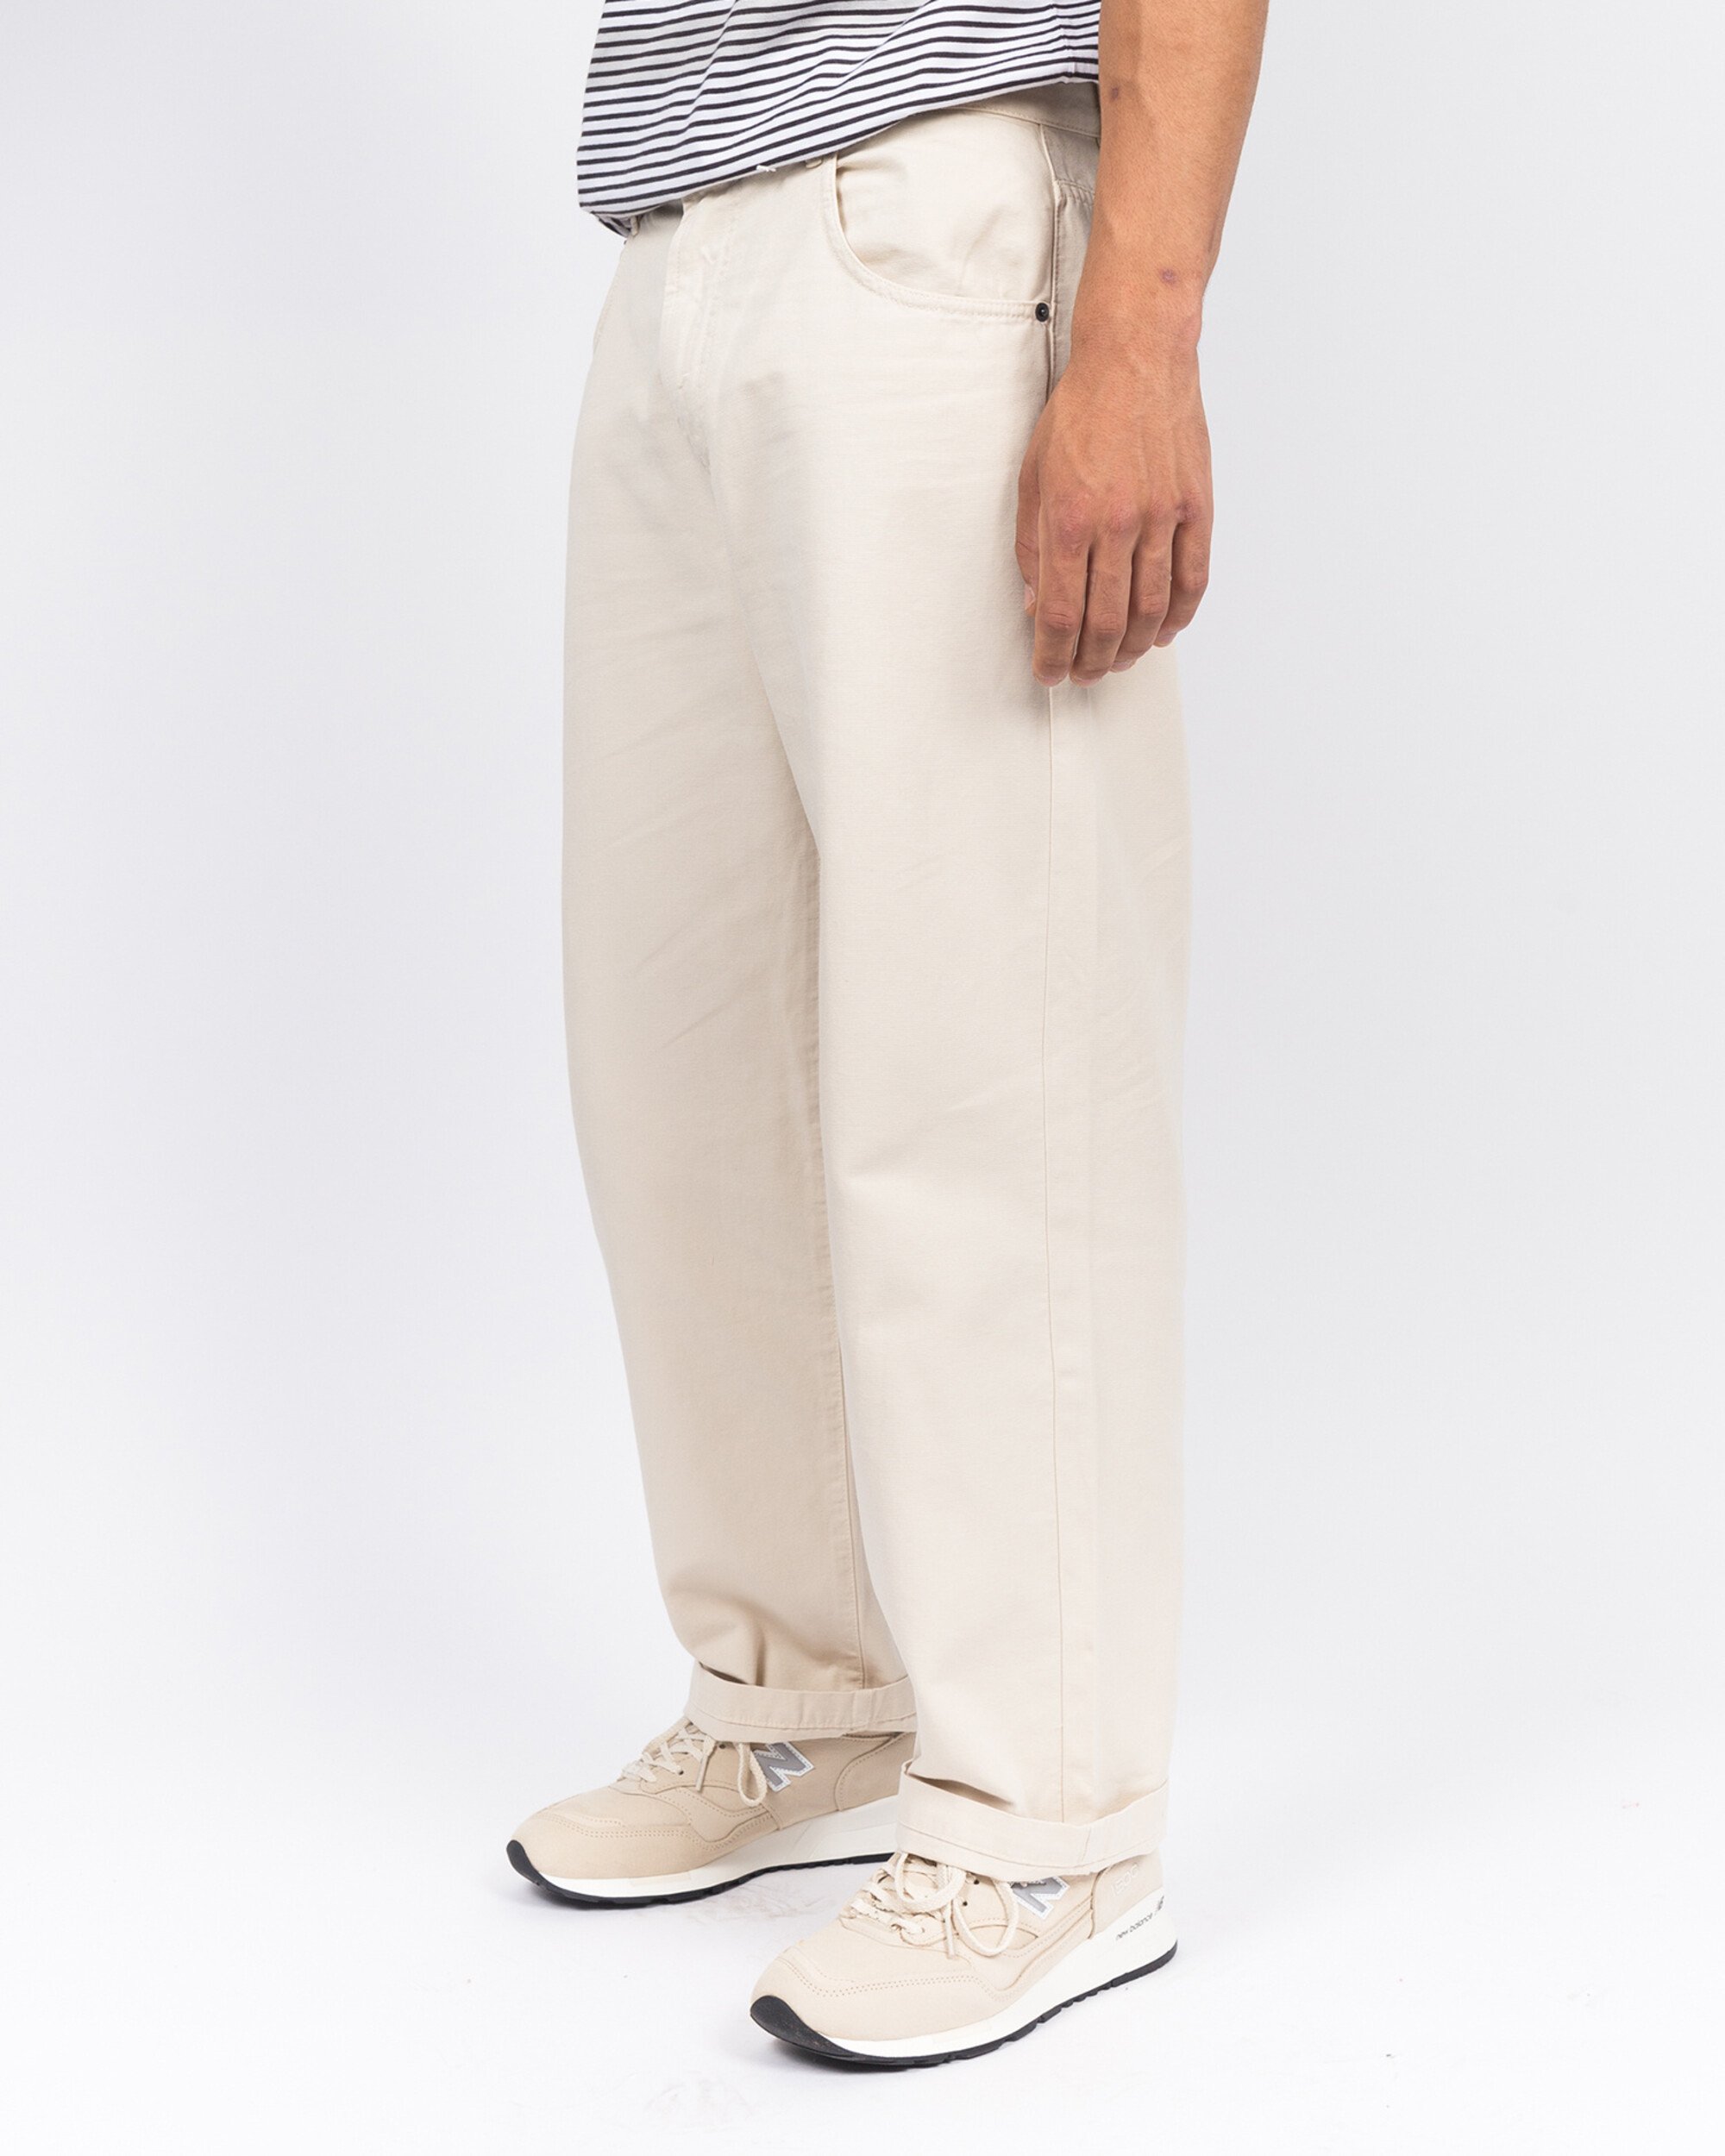 Pop Trading Co DRS pants off white canvas